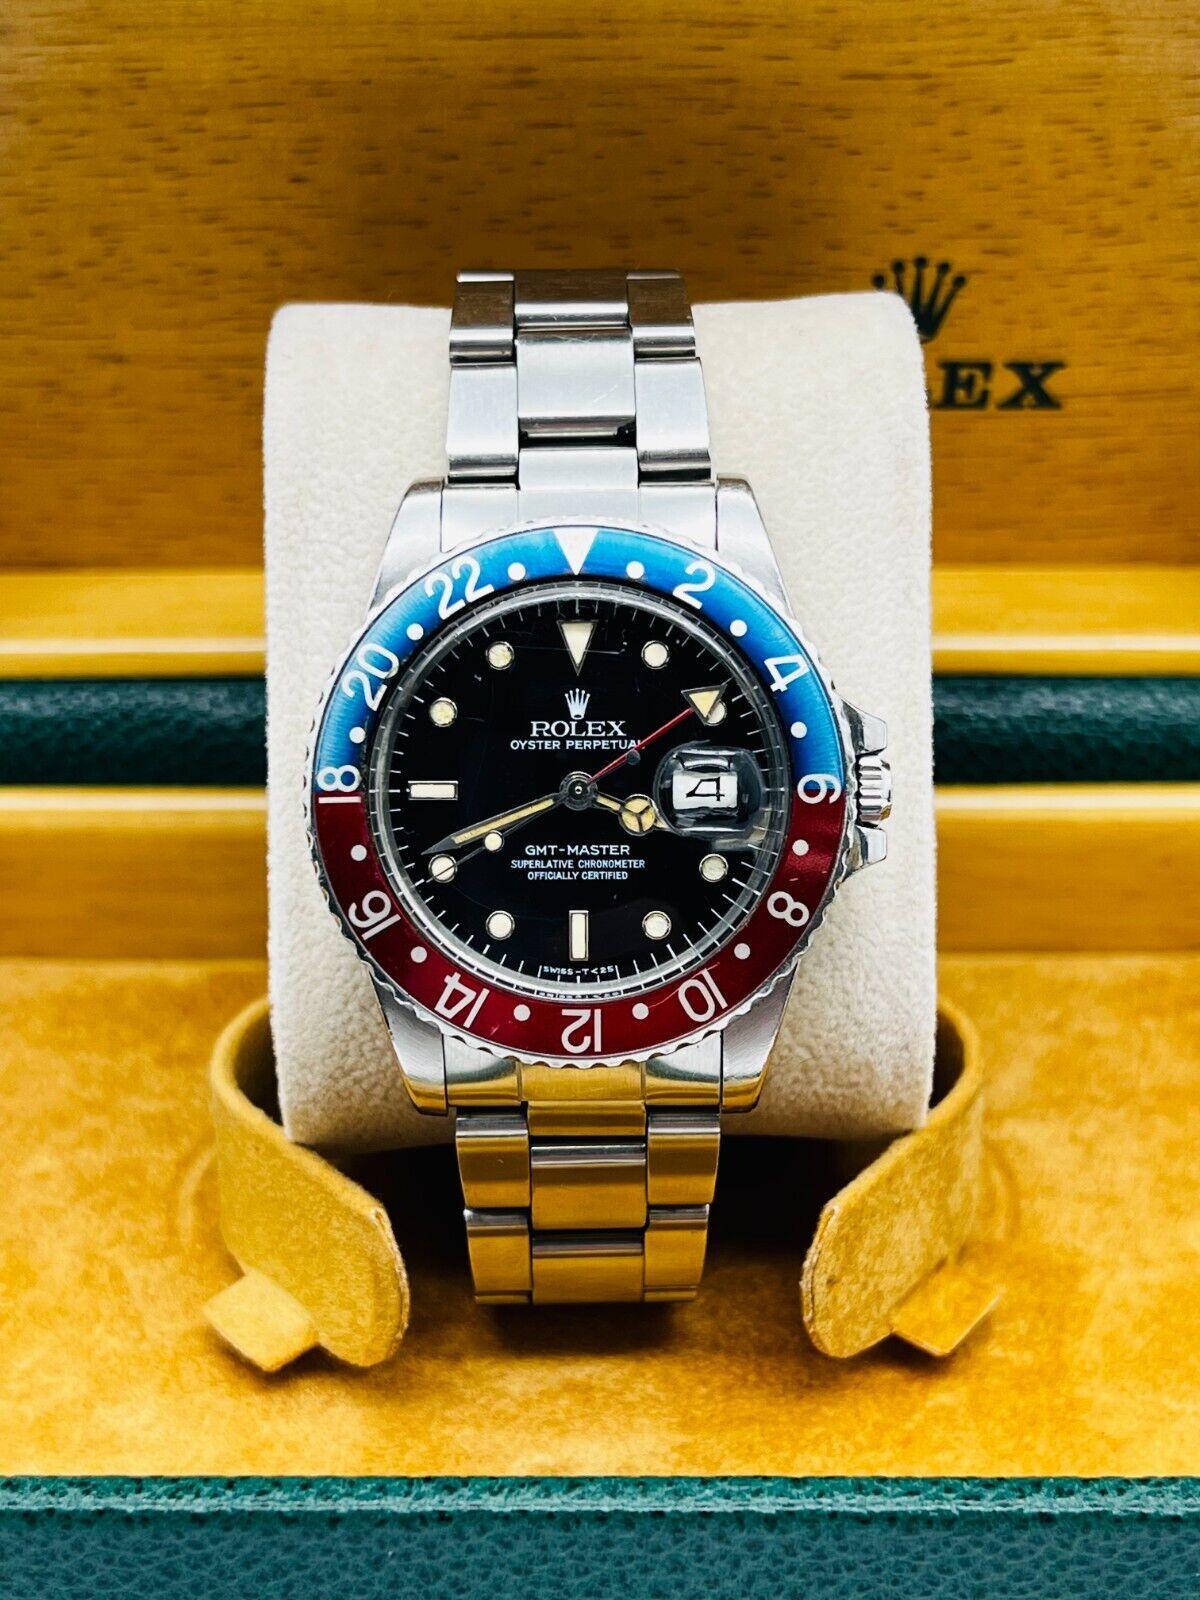 Rare Rolex 16750 GMT Master Pepsi Stainless Steel Original Spider Glossy Dial For Sale 9